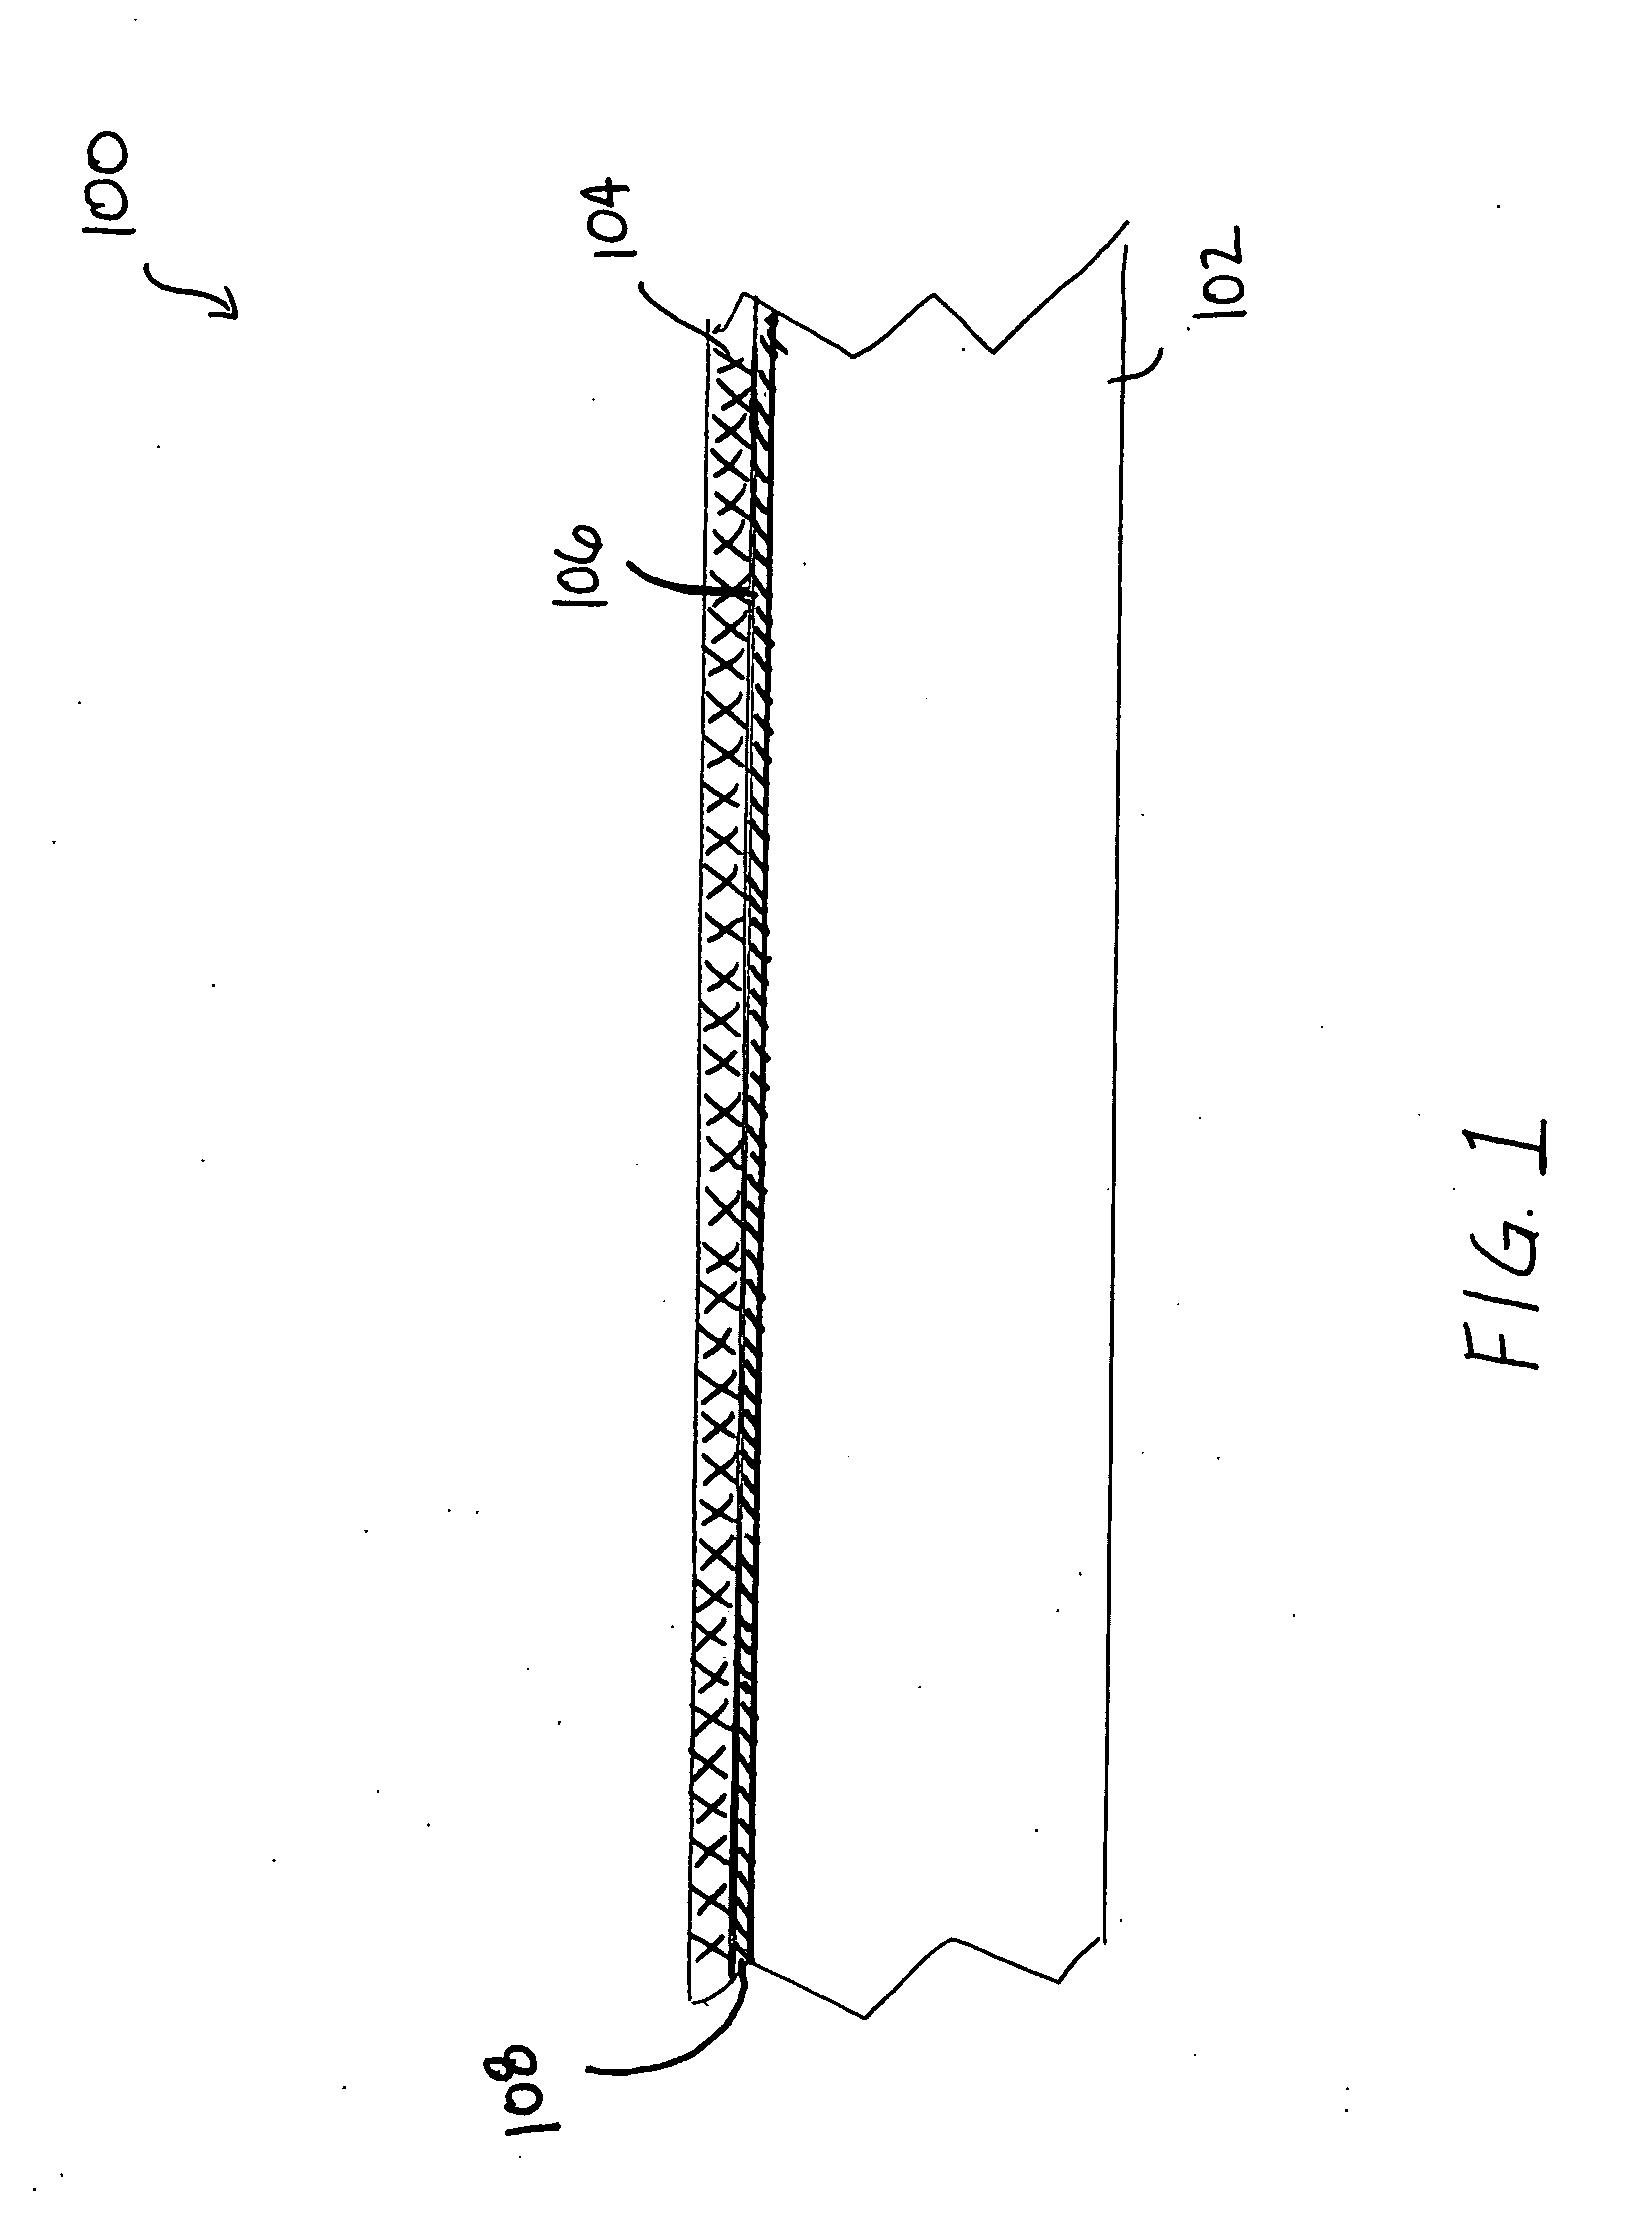 Composite cement article incorporating a powder coating and methods of making same